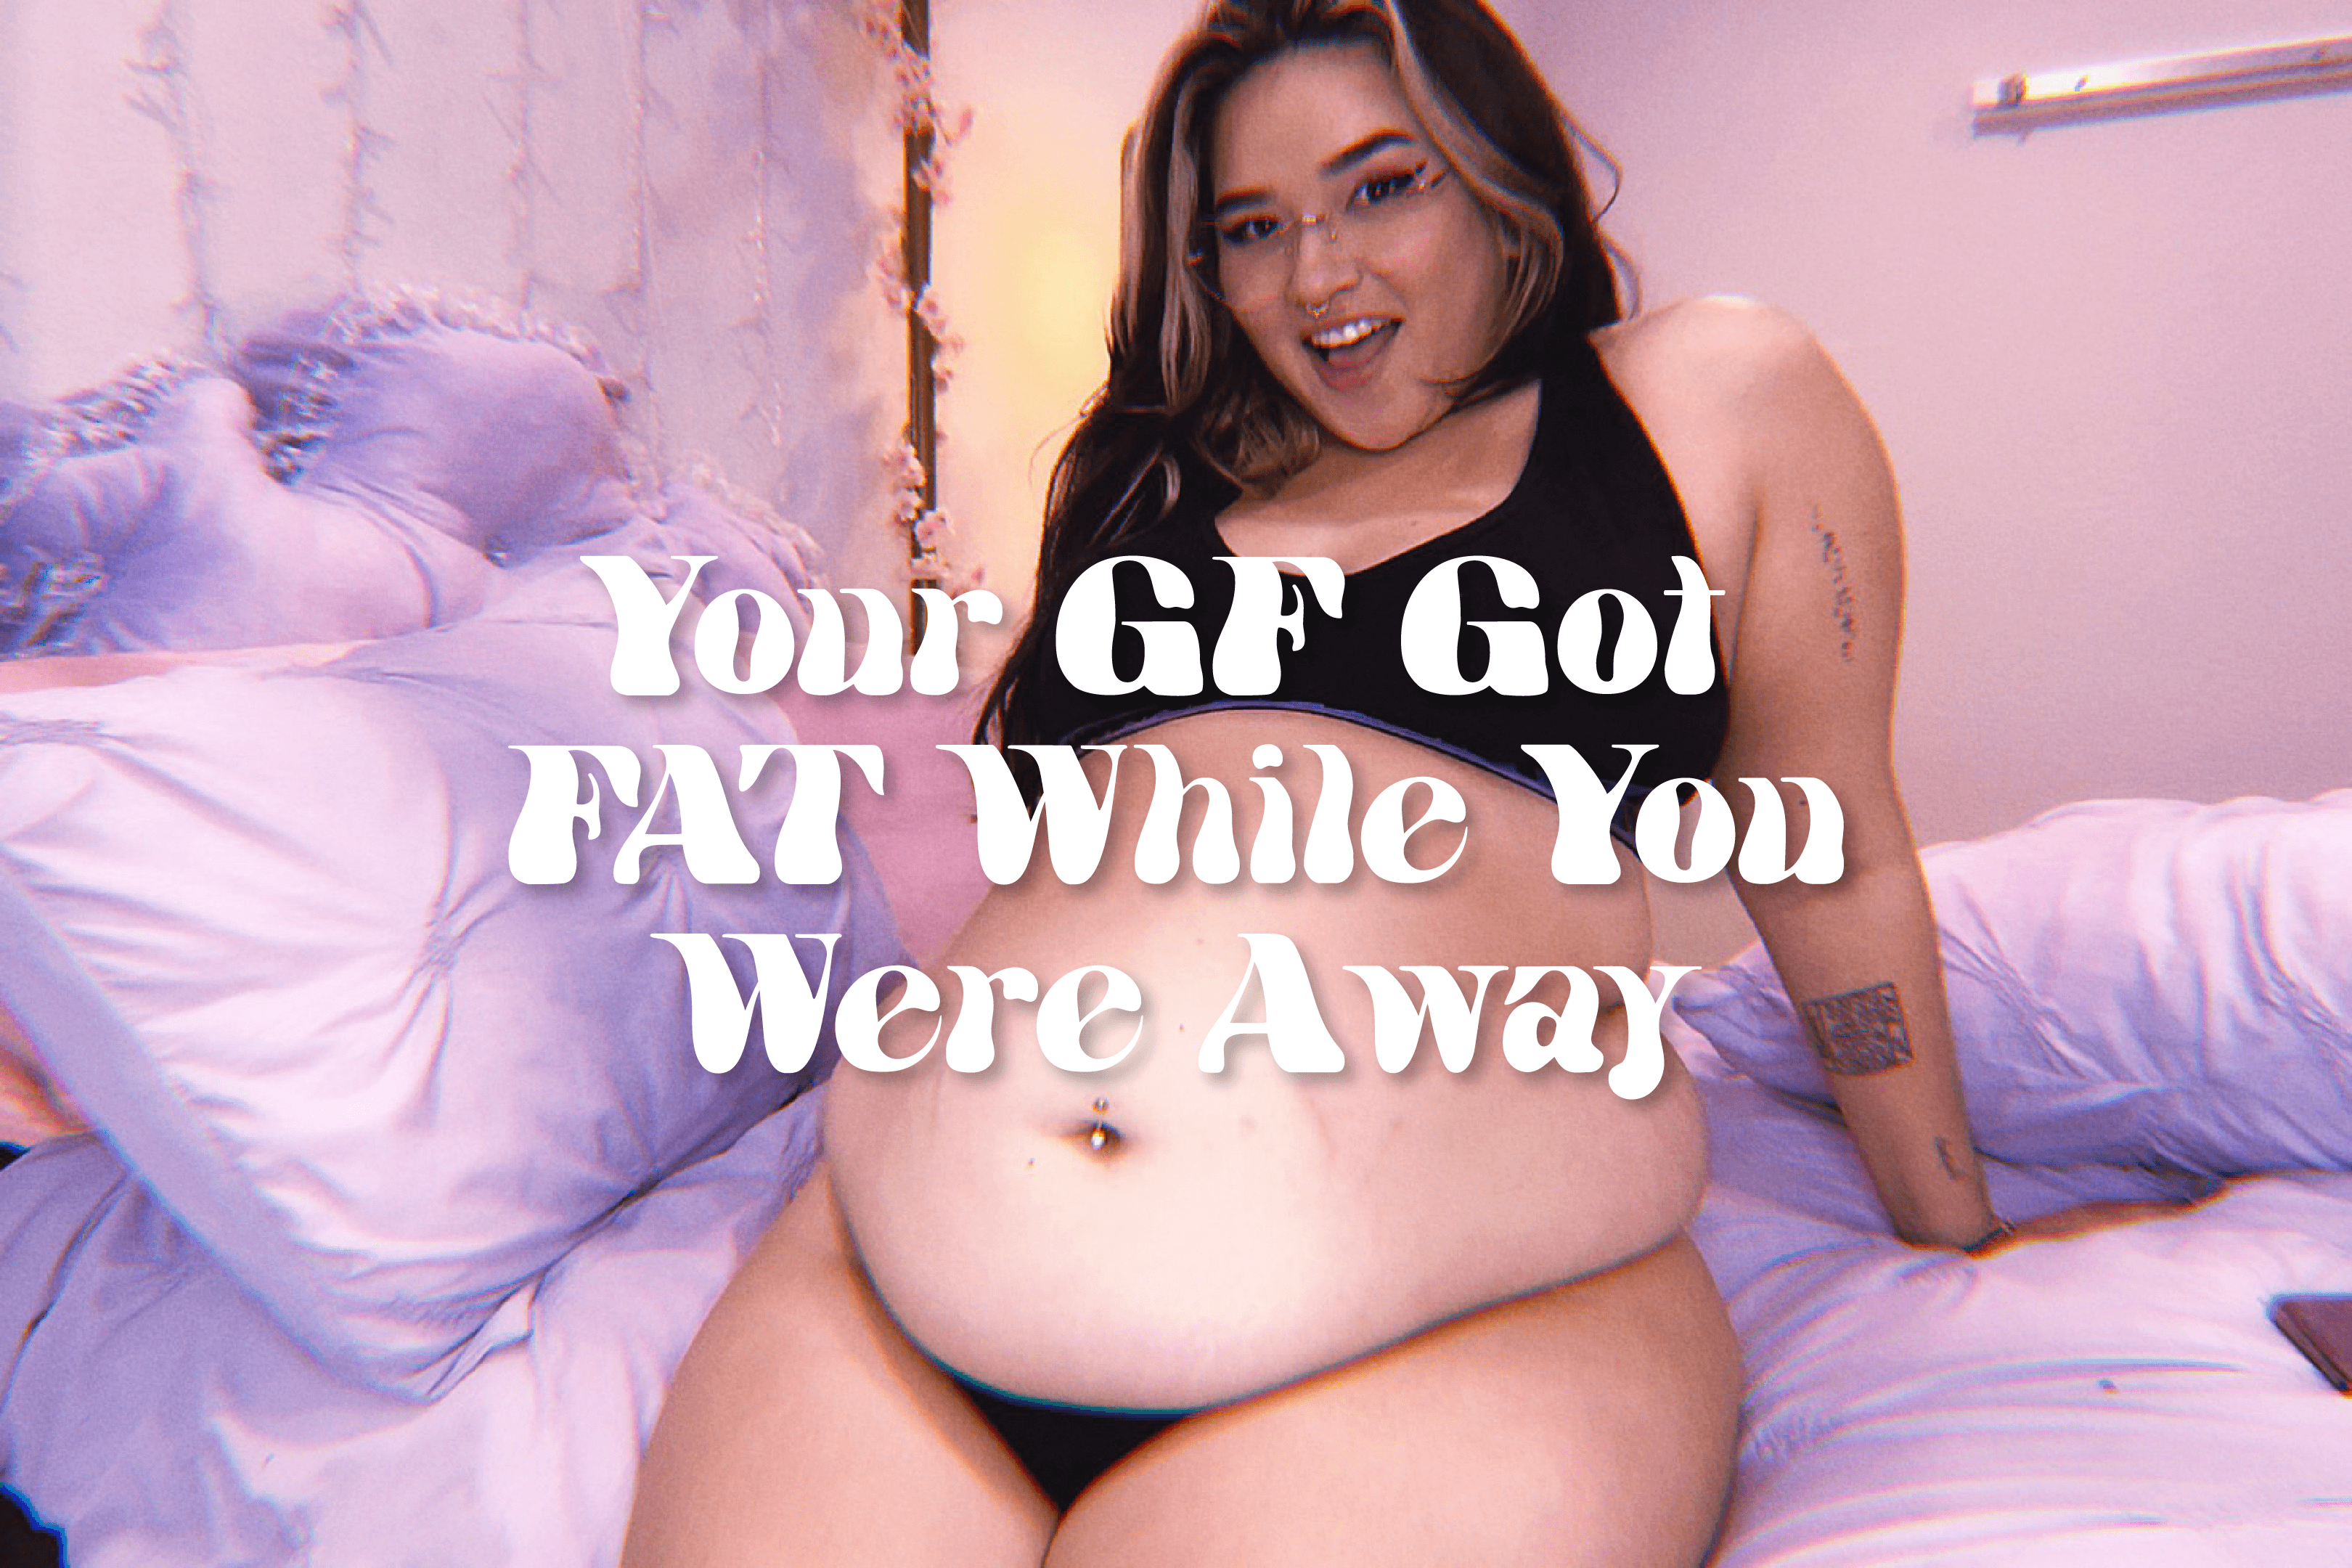 Coming Home to Your Fattened-Up GF - Video Clips - Weight Gain - feeder/feedee image